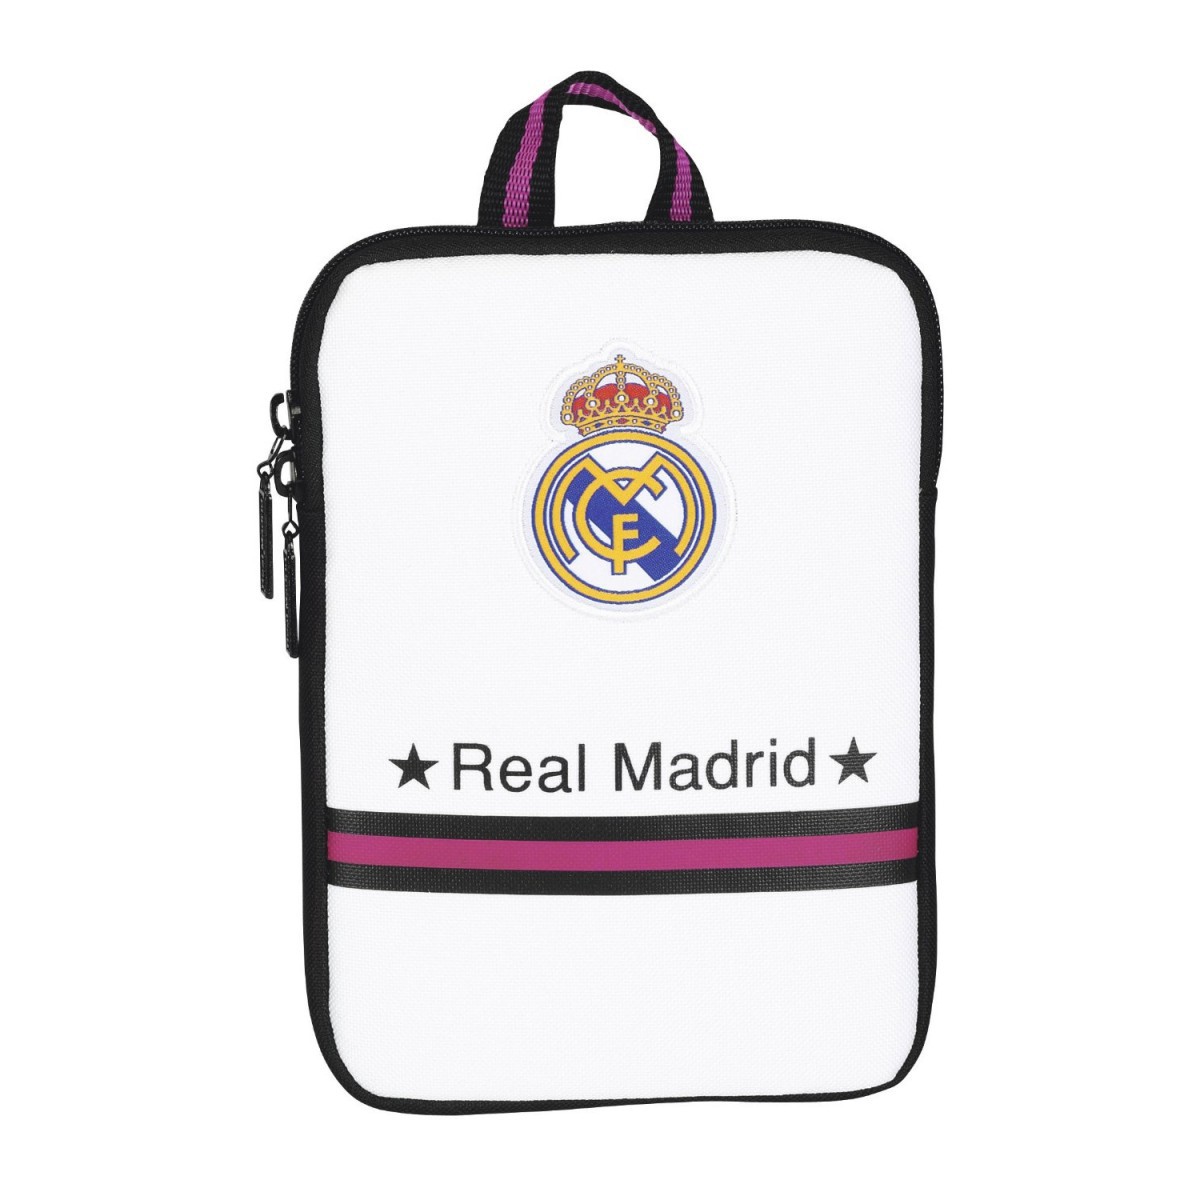 Real Madrid - Tablet Tasche 7.9 Zoll